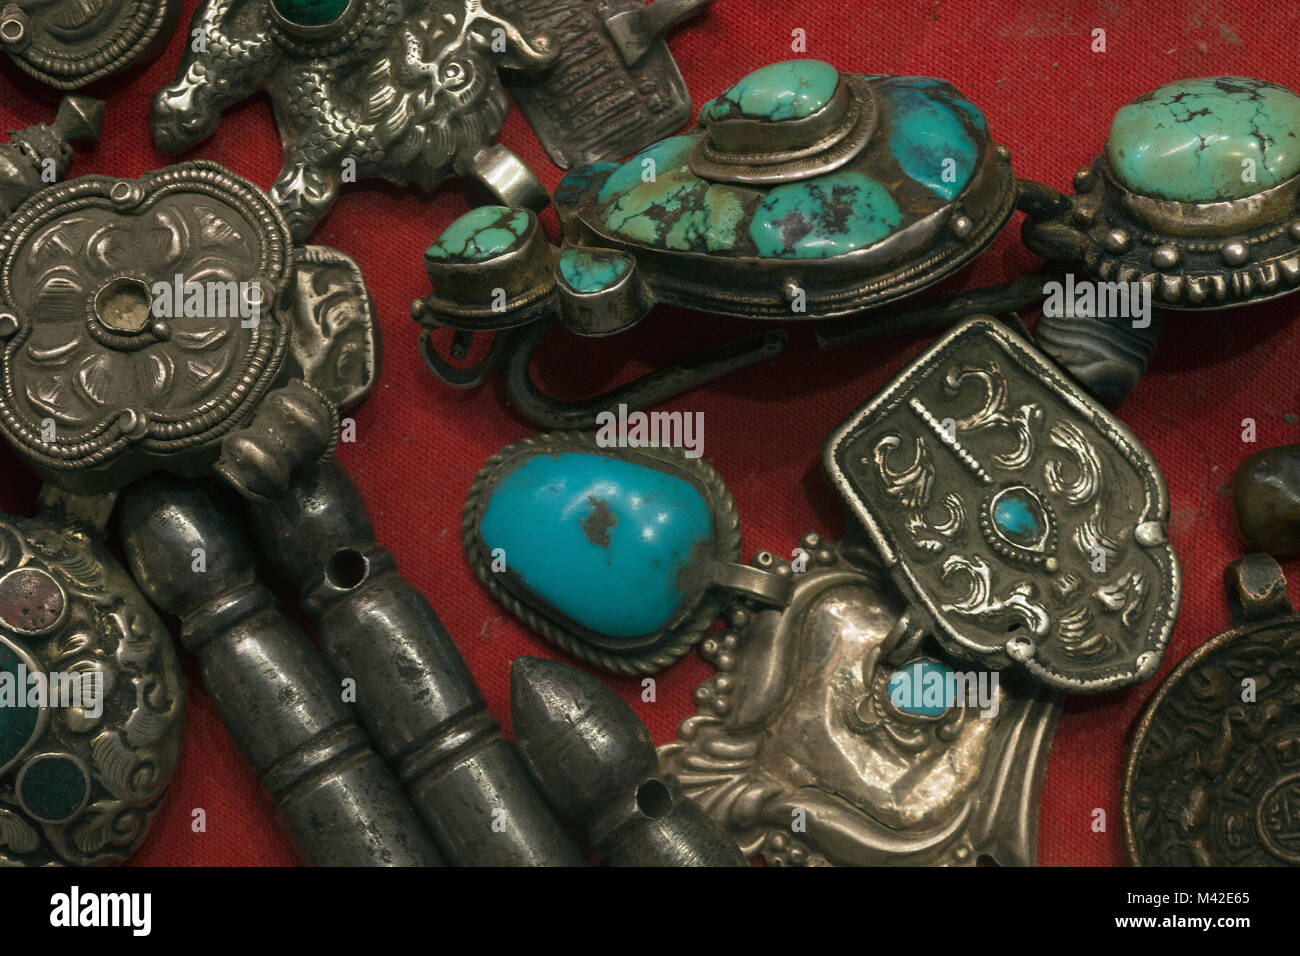 Antique Tibetan silver man's ornaments: men's earrings with turquoise, amulets, Buddhist knives. Stock Photo